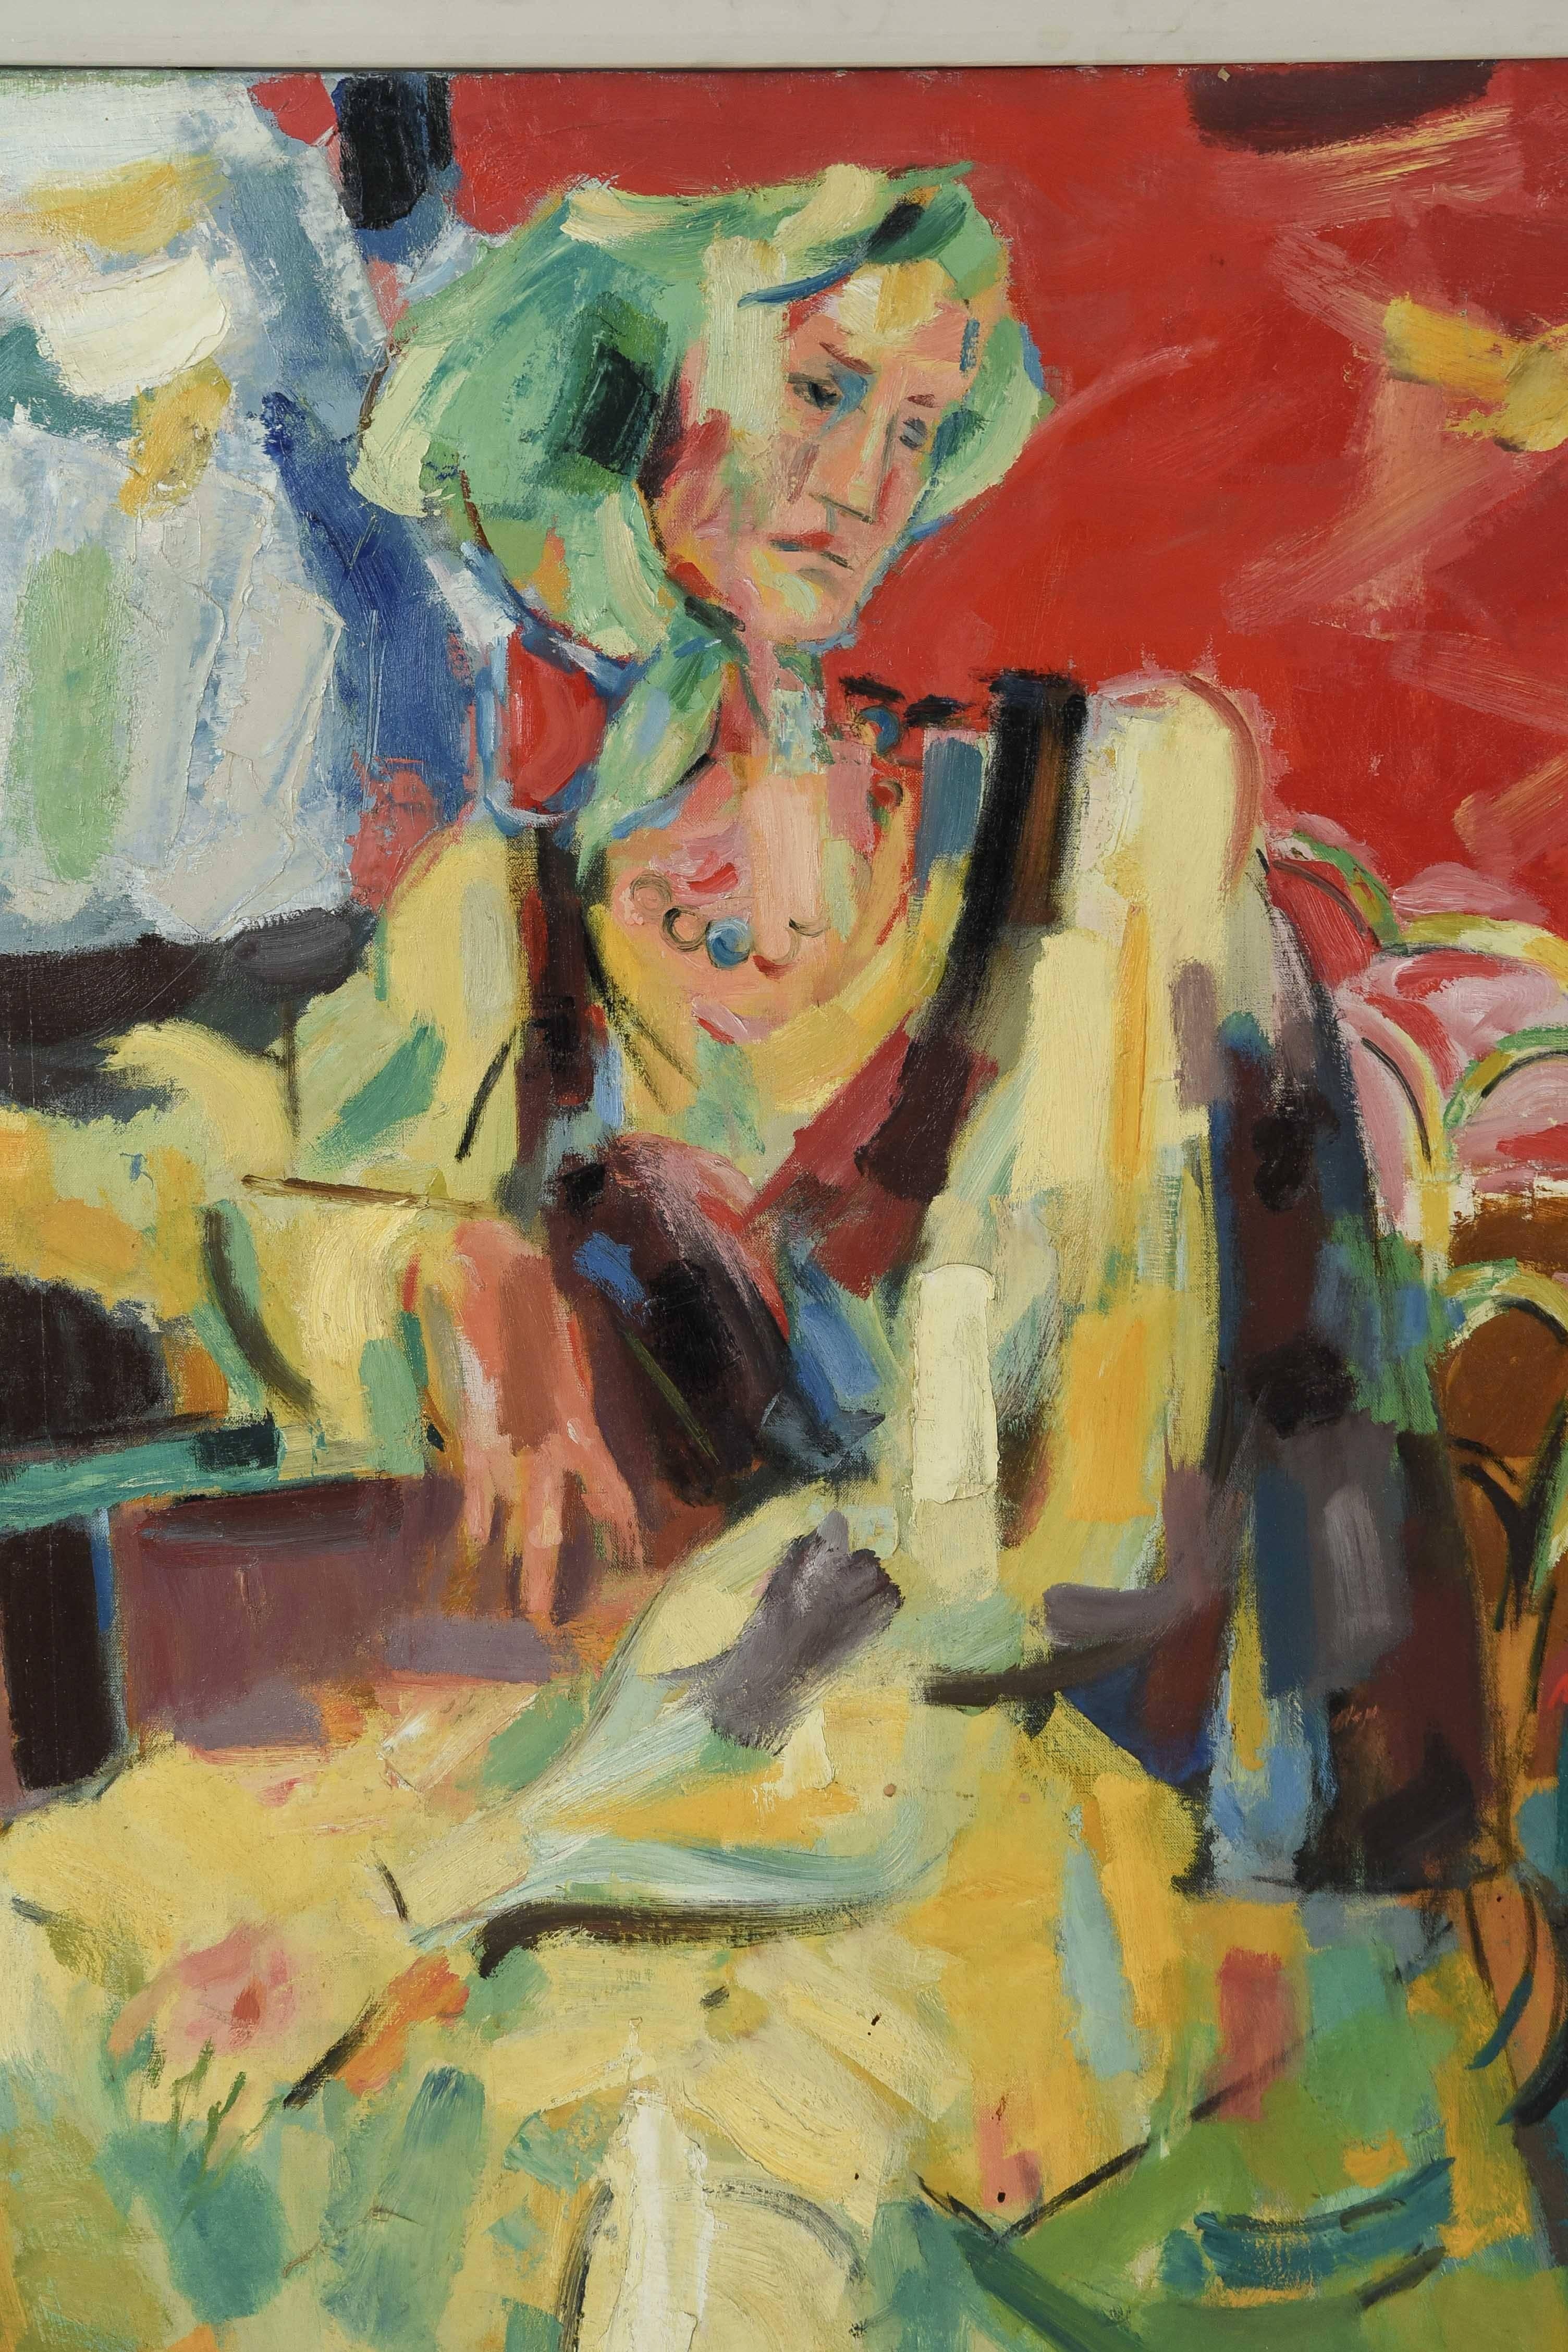 An abstract, figural oil on canvas by artist Alex Minewski (1917-1979) depicting a woman sitting in a chair. Titled 